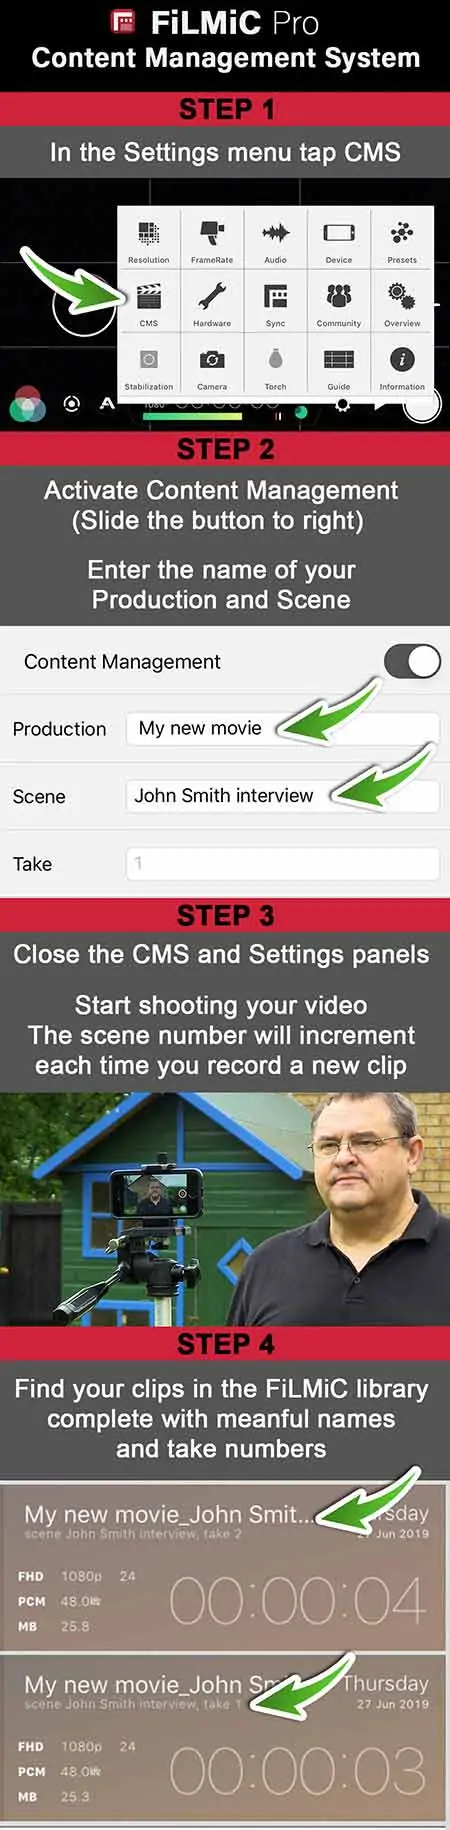 An infographic showing how to use Filmic Pro's Content Management System or CMS